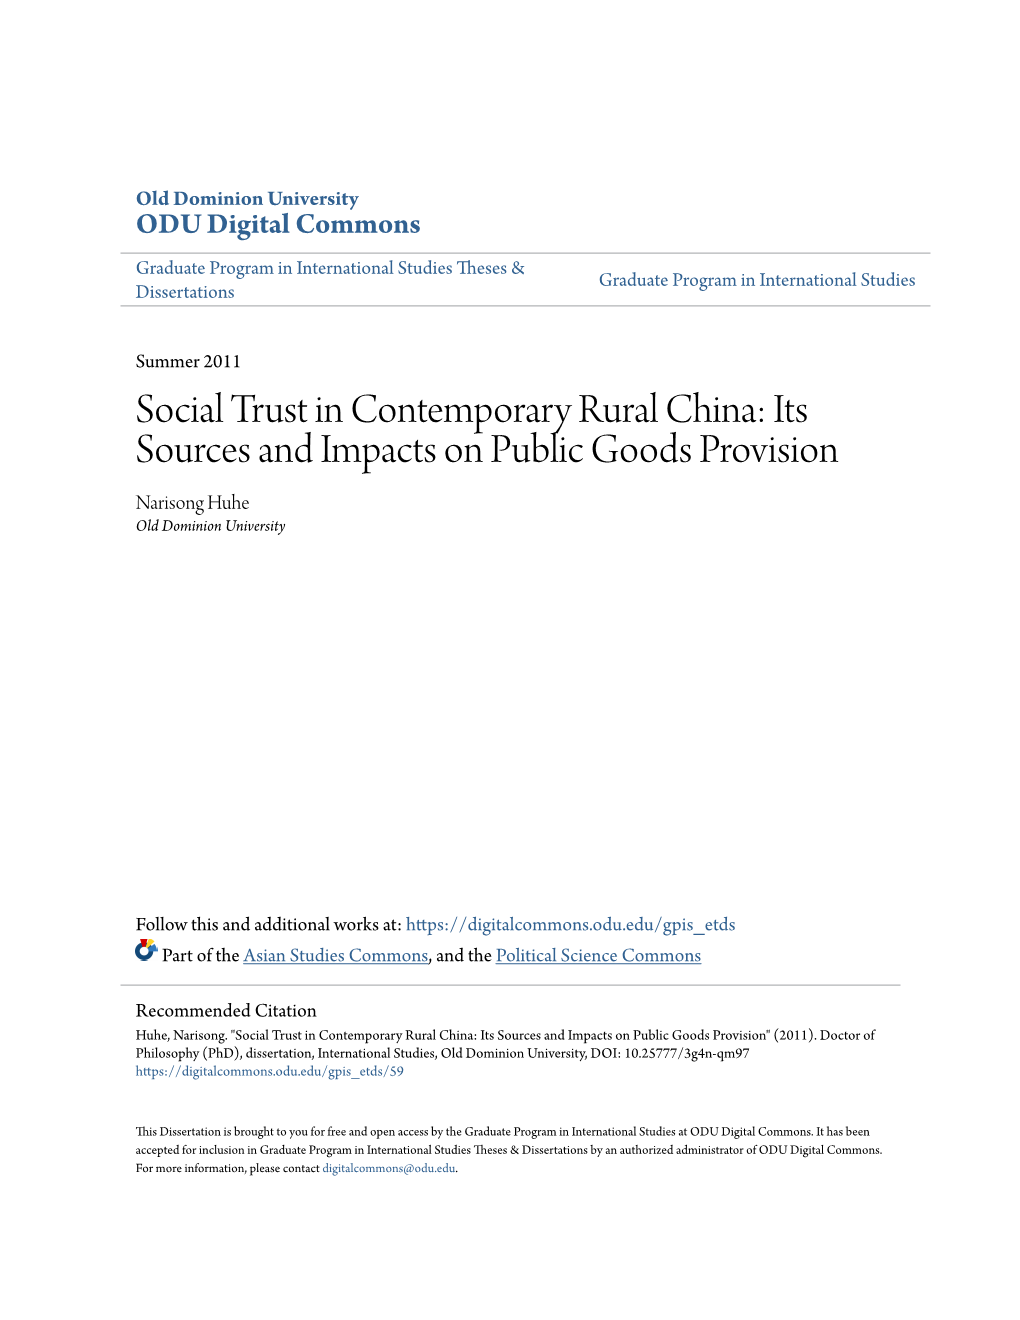 Social Trust in Contemporary Rural China: Its Sources and Impacts on Public Goods Provision Narisong Huhe Old Dominion University